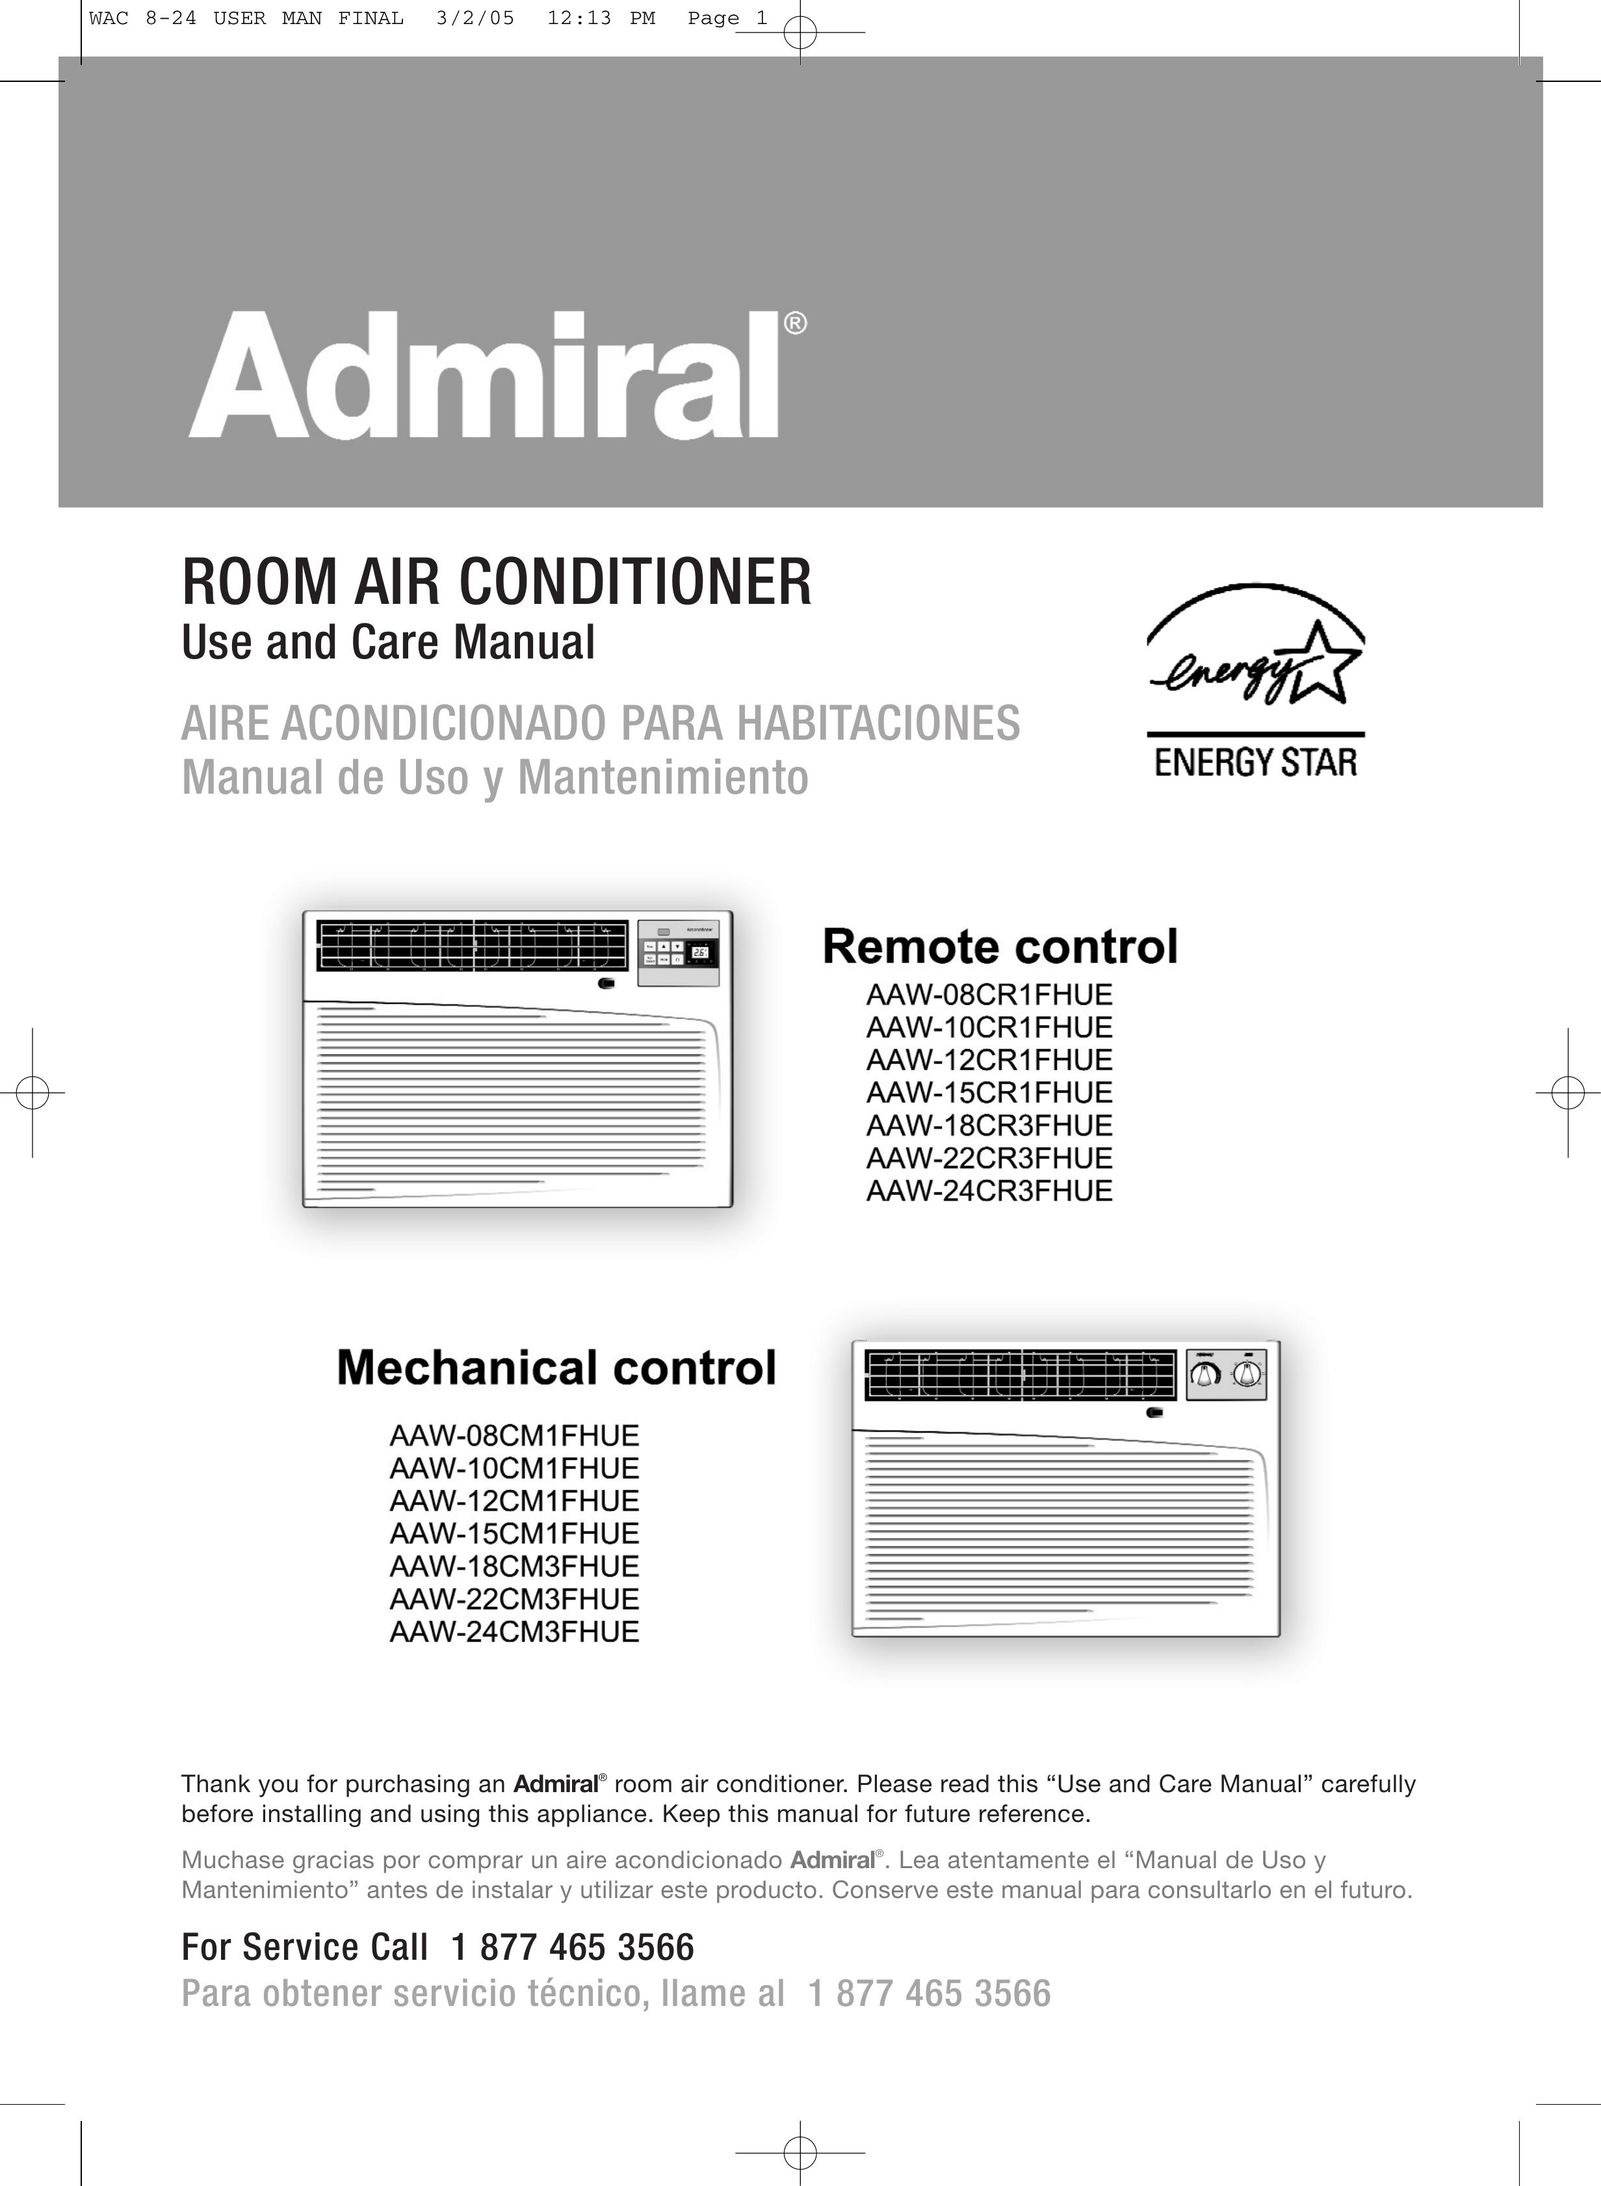 Admiral AAW-08CM1FHUE Air Conditioner User Manual (Page 1)